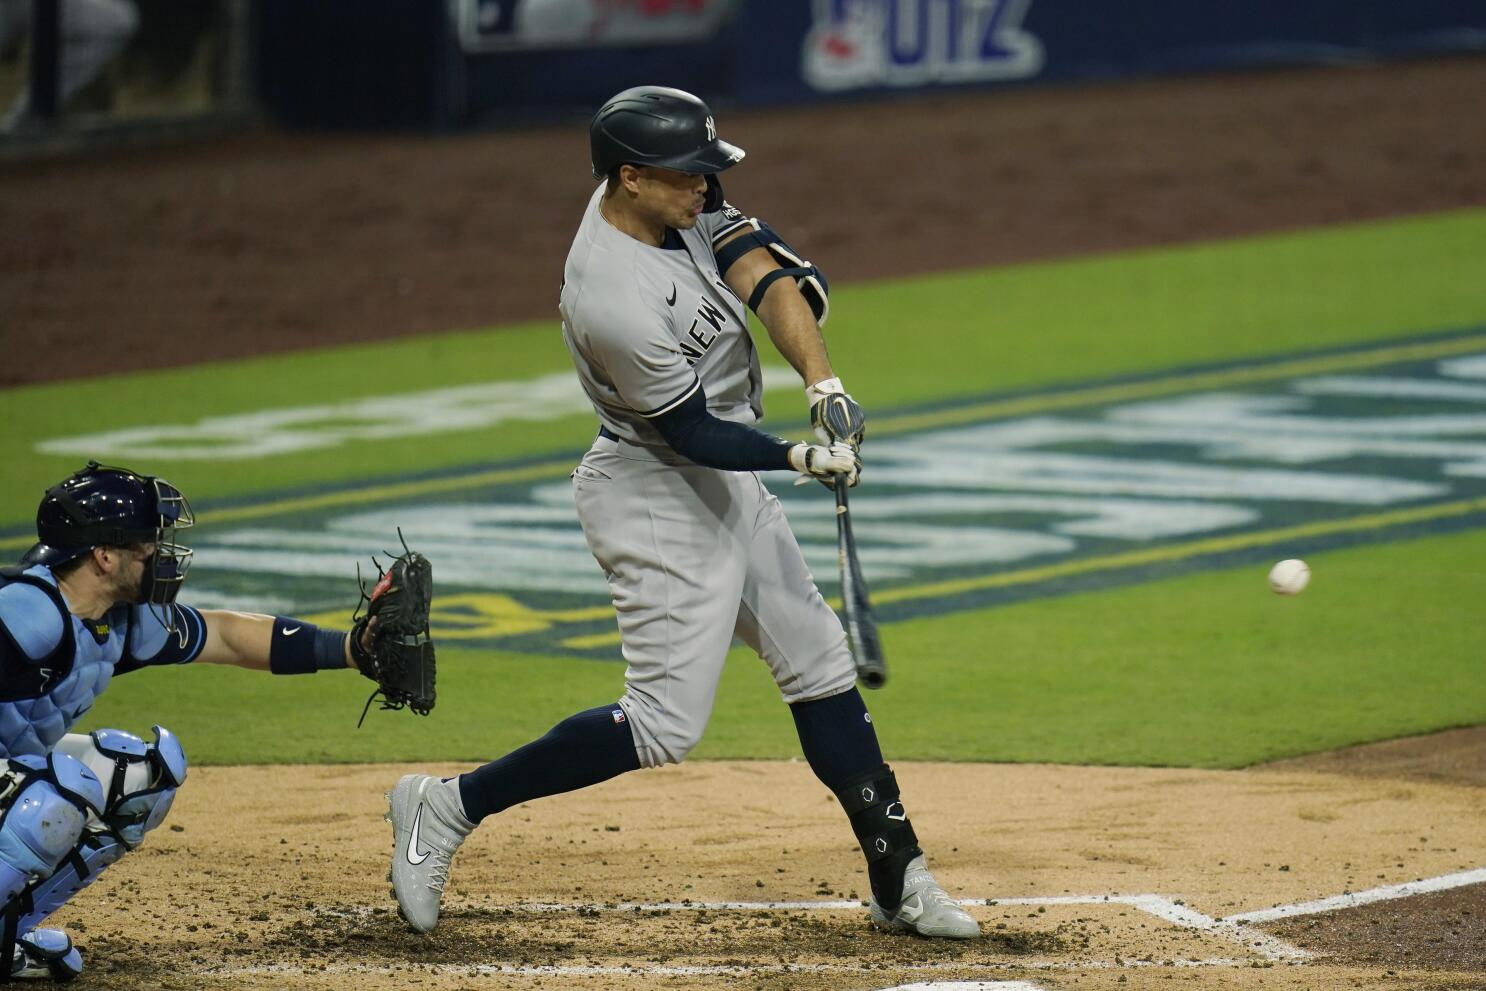 Giancarlo Stanton home runs: How many HRs will Yankees DH hit in